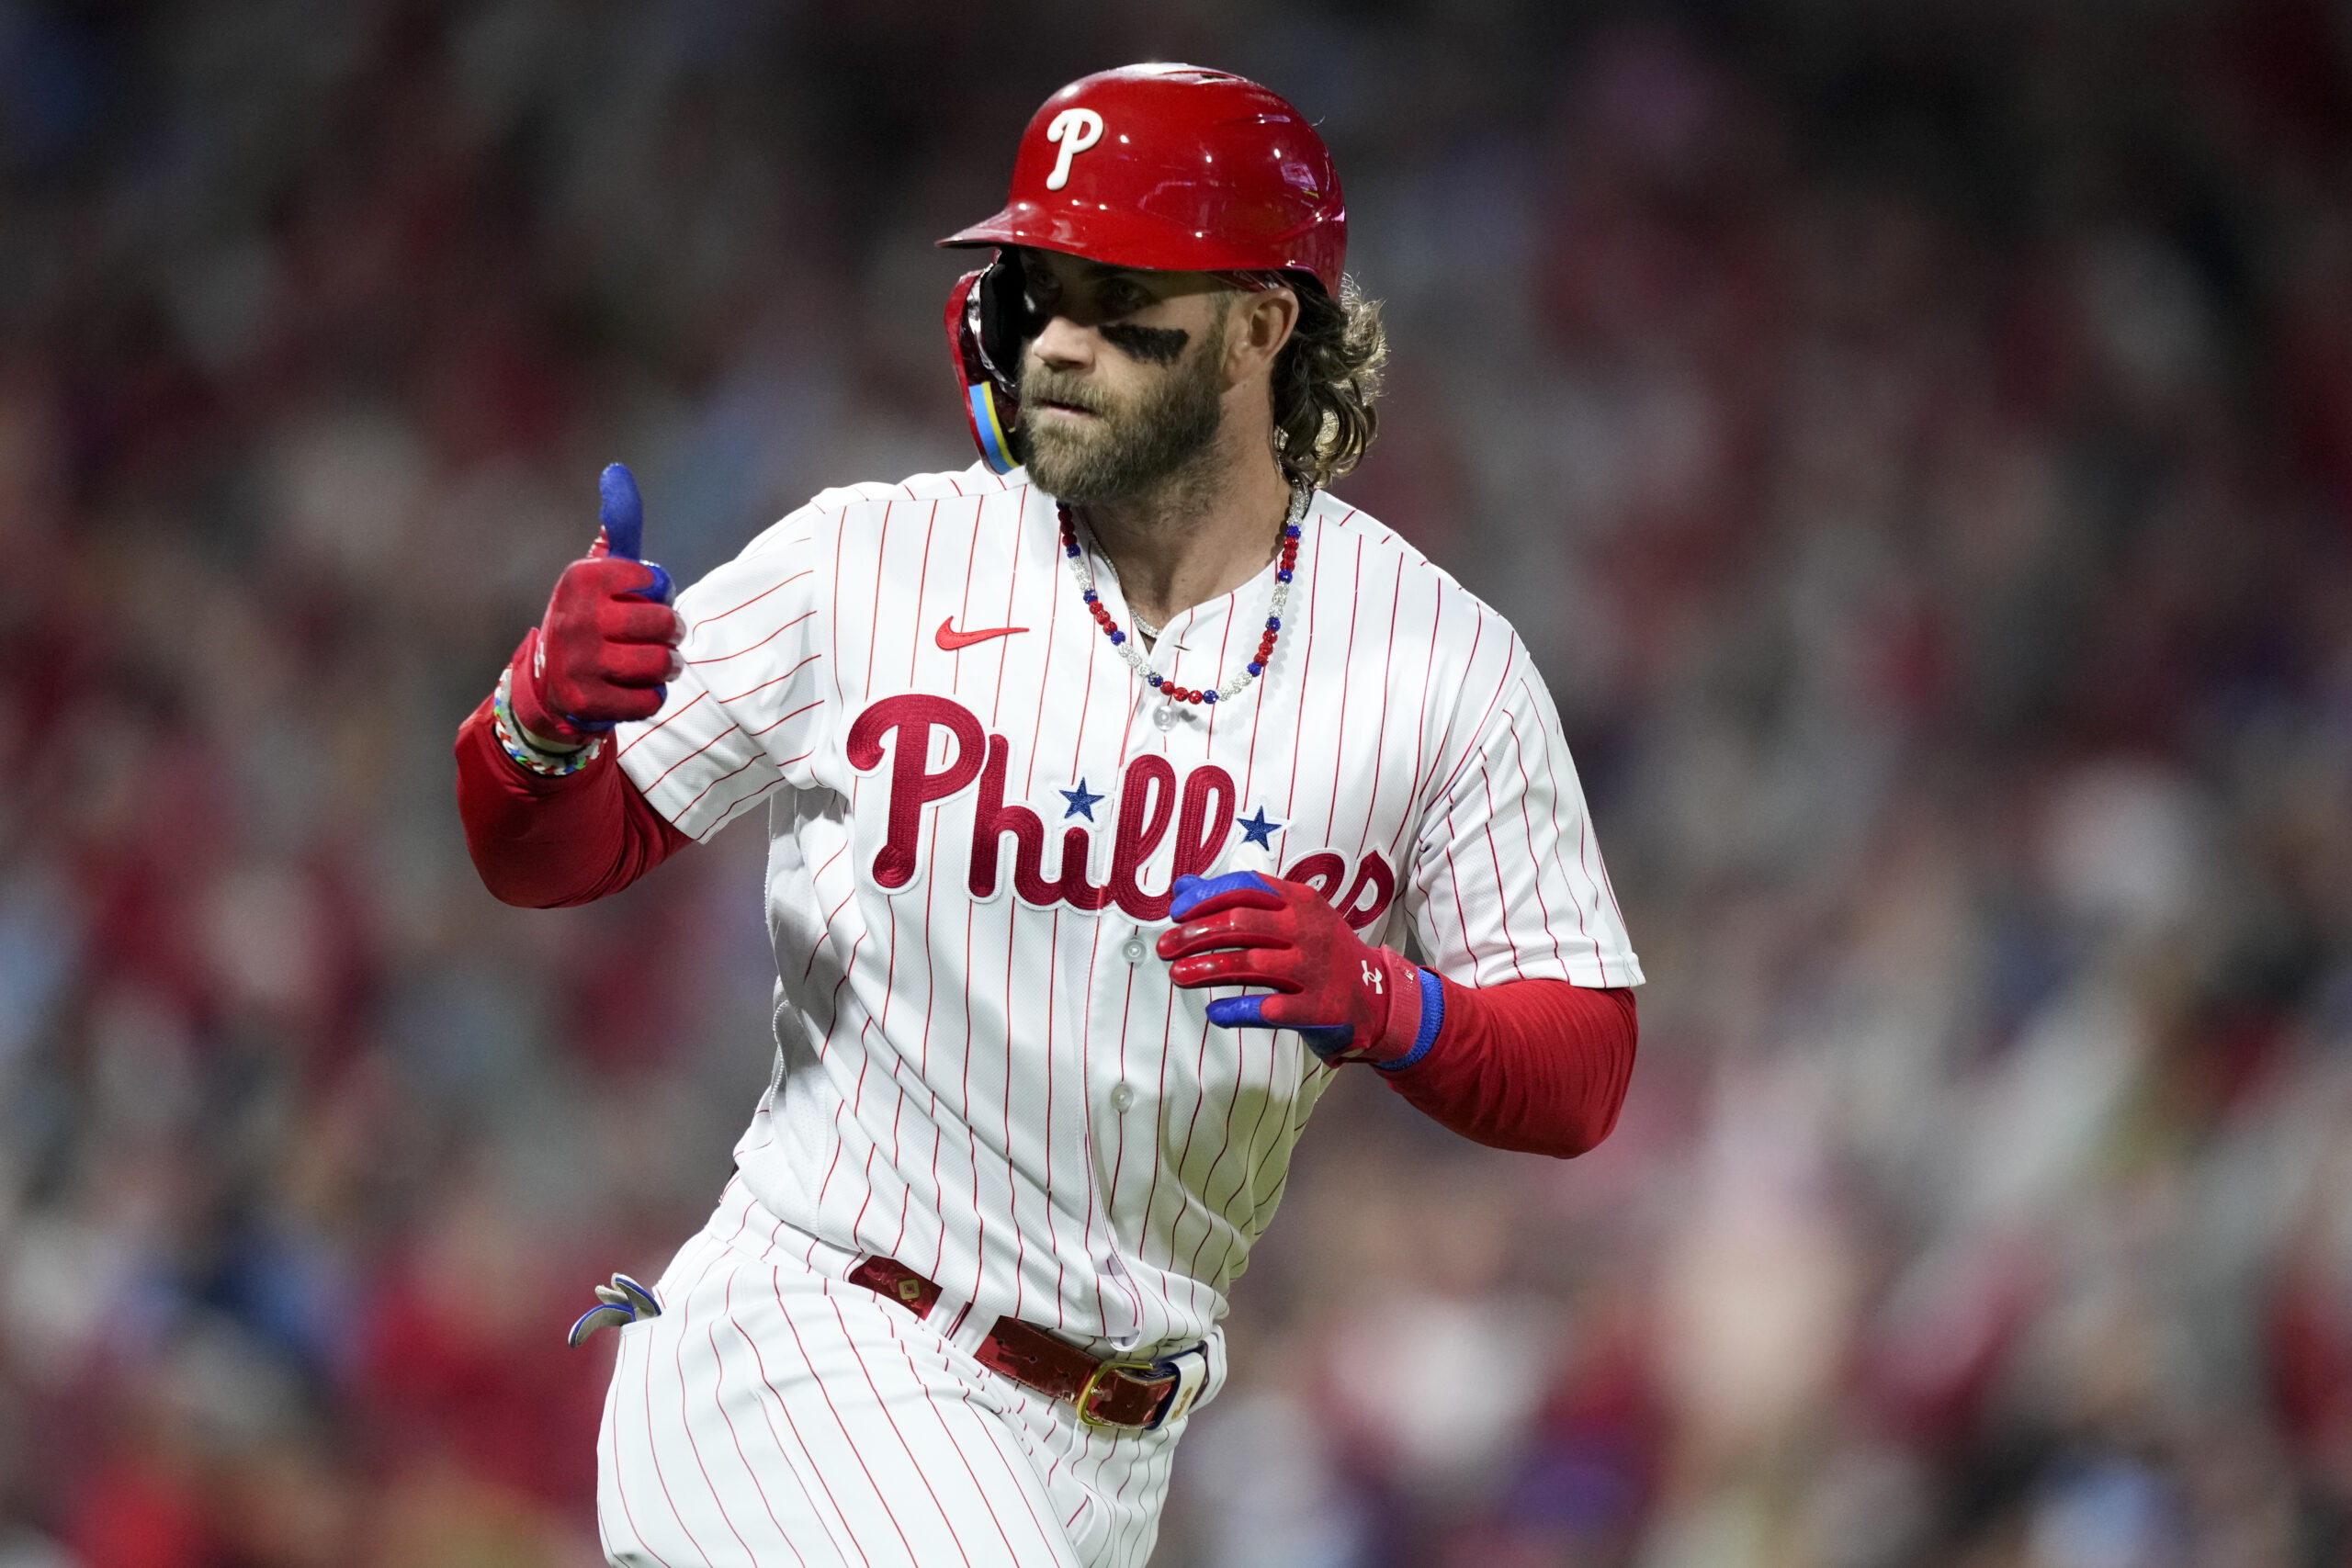 See Bryce Harper and Kids Wear Matching Jackets After Phillies Win